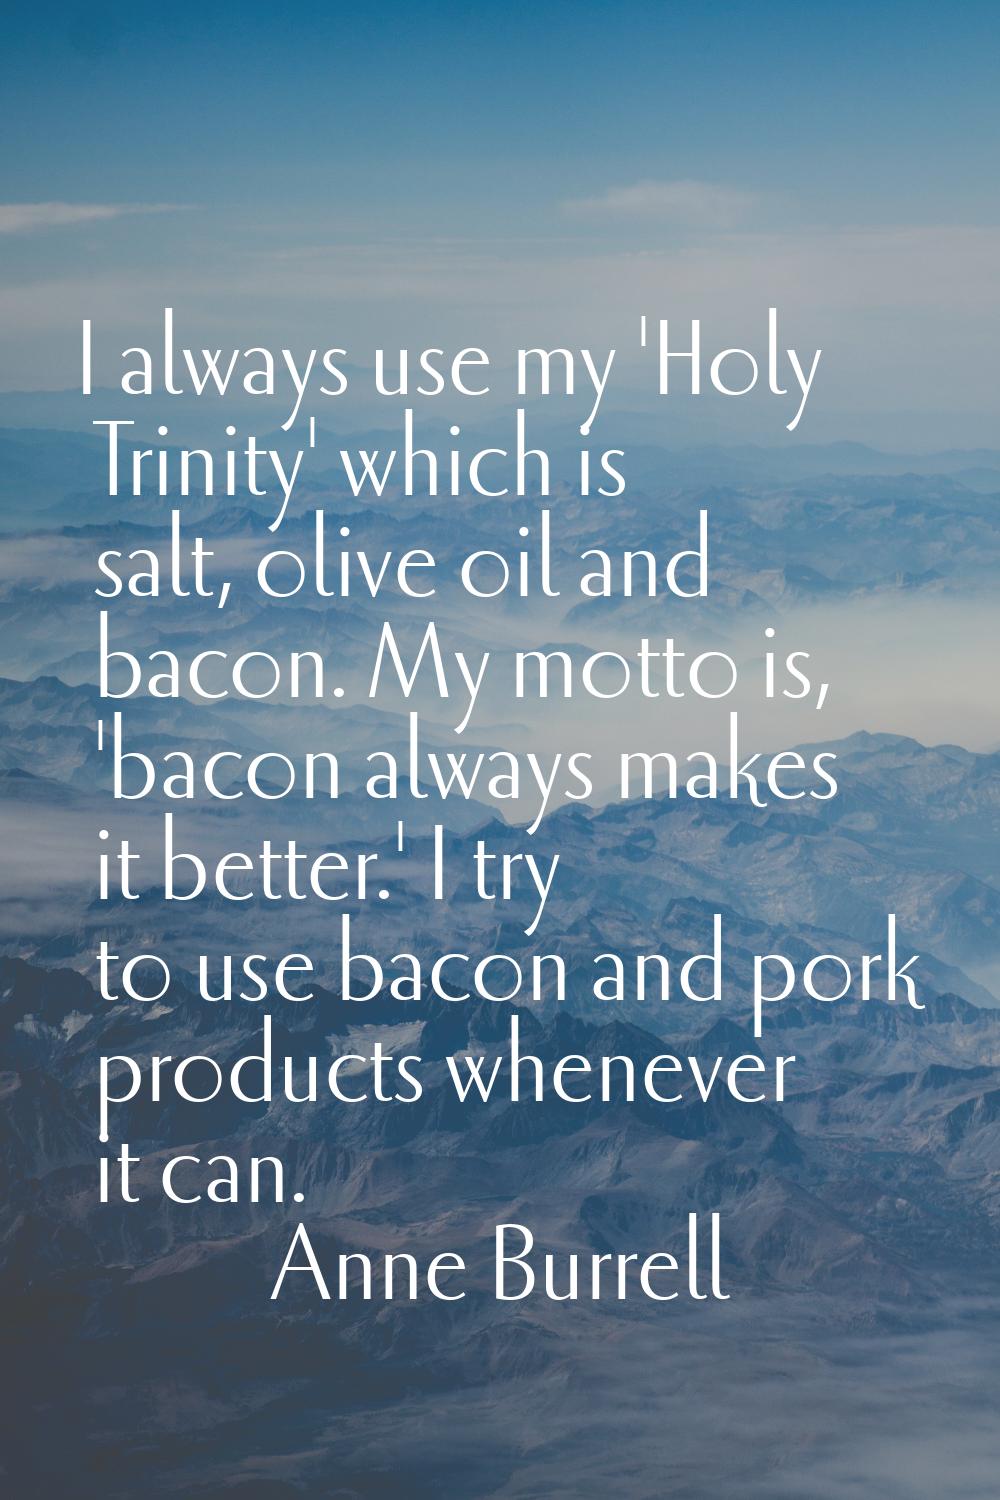 I always use my 'Holy Trinity' which is salt, olive oil and bacon. My motto is, 'bacon always makes